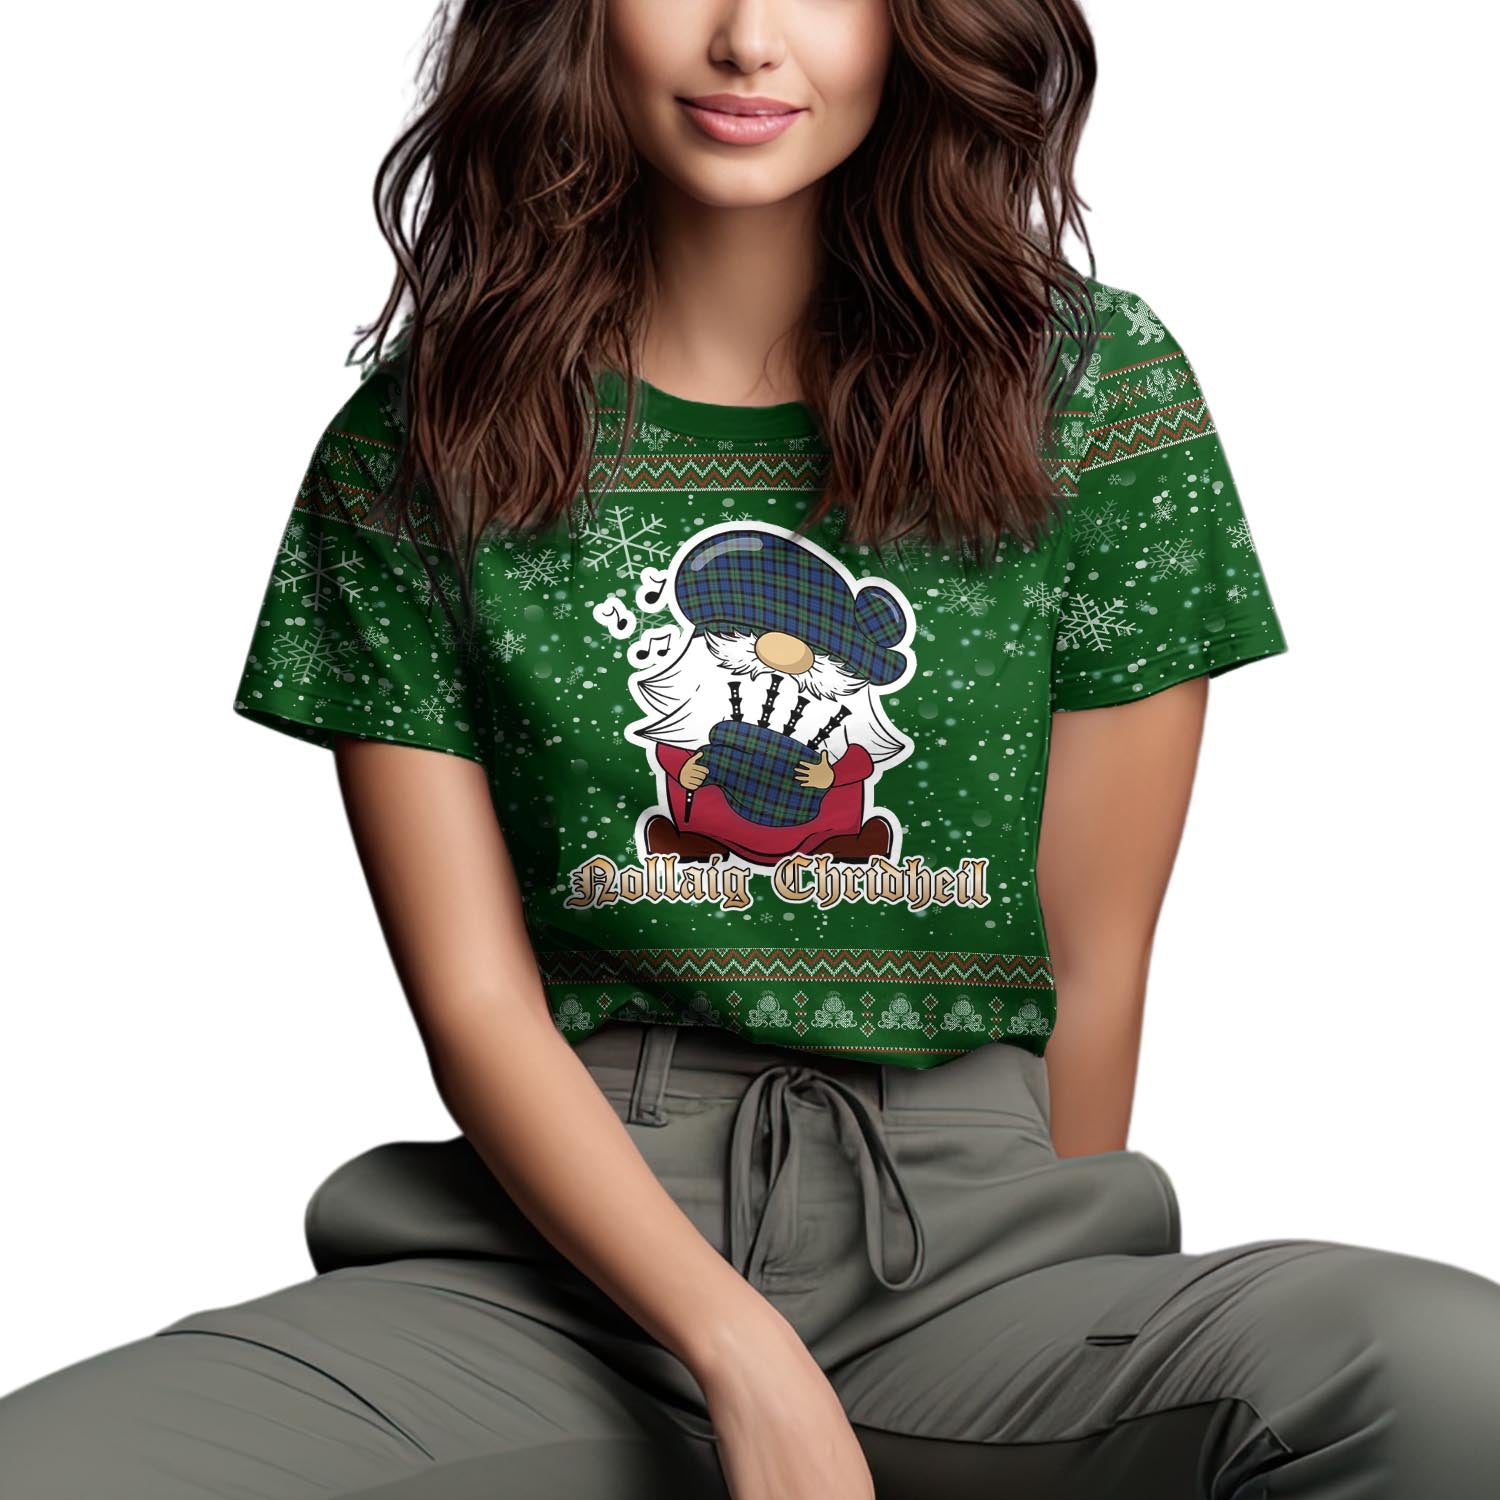 Fletcher Ancient Clan Christmas Family T-Shirt with Funny Gnome Playing Bagpipes Women's Shirt Green - Tartanvibesclothing